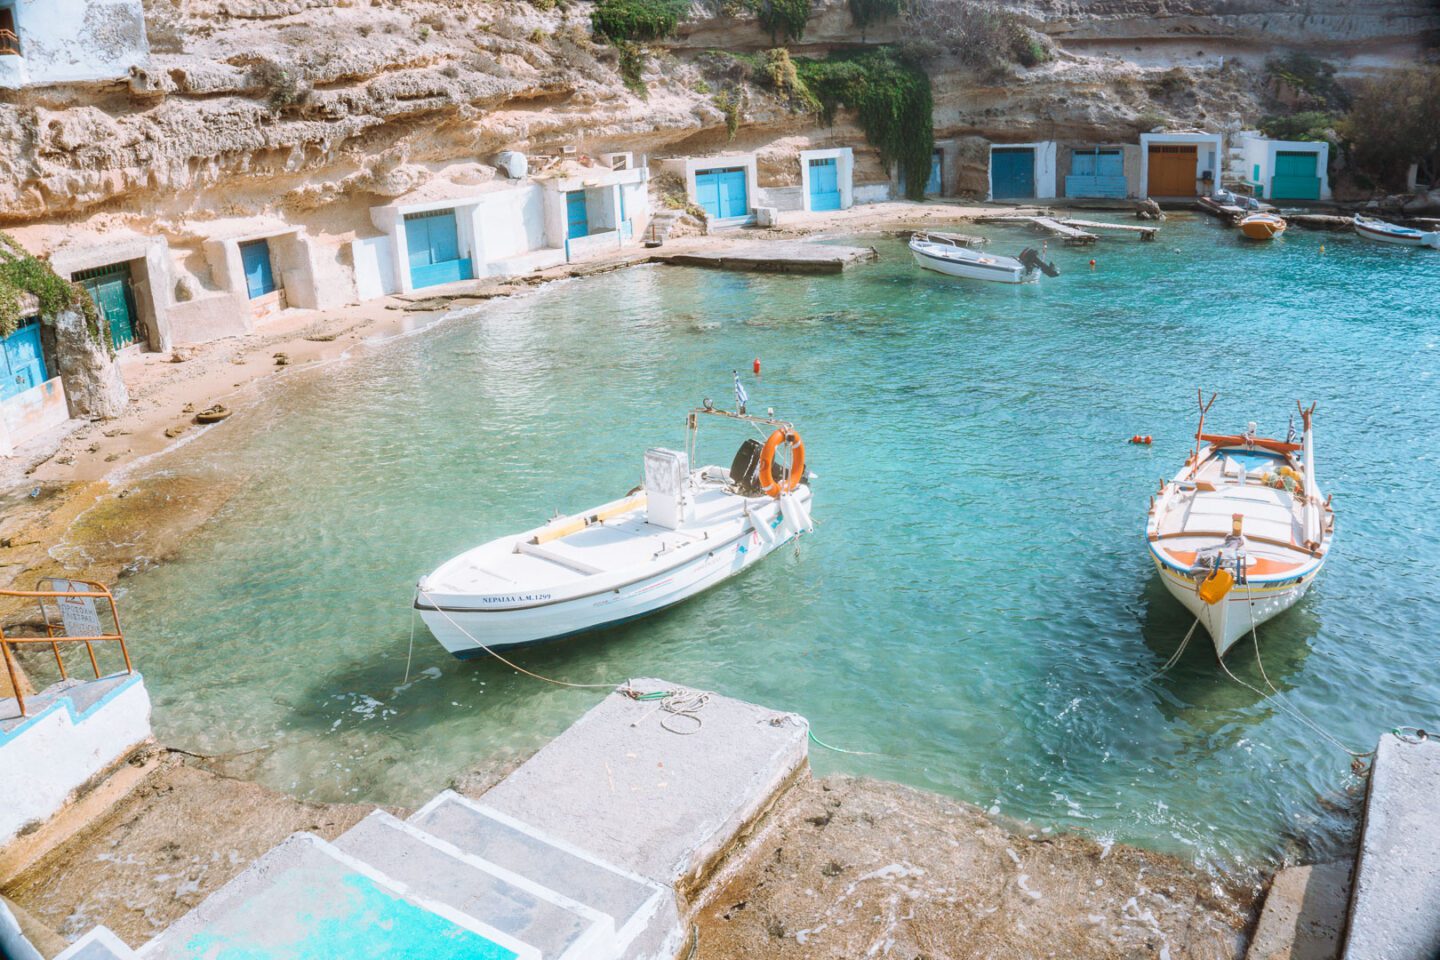 When Greek island hopping be sure to stop at Milos and visit Mandrakia, a charming fishing village on the island.